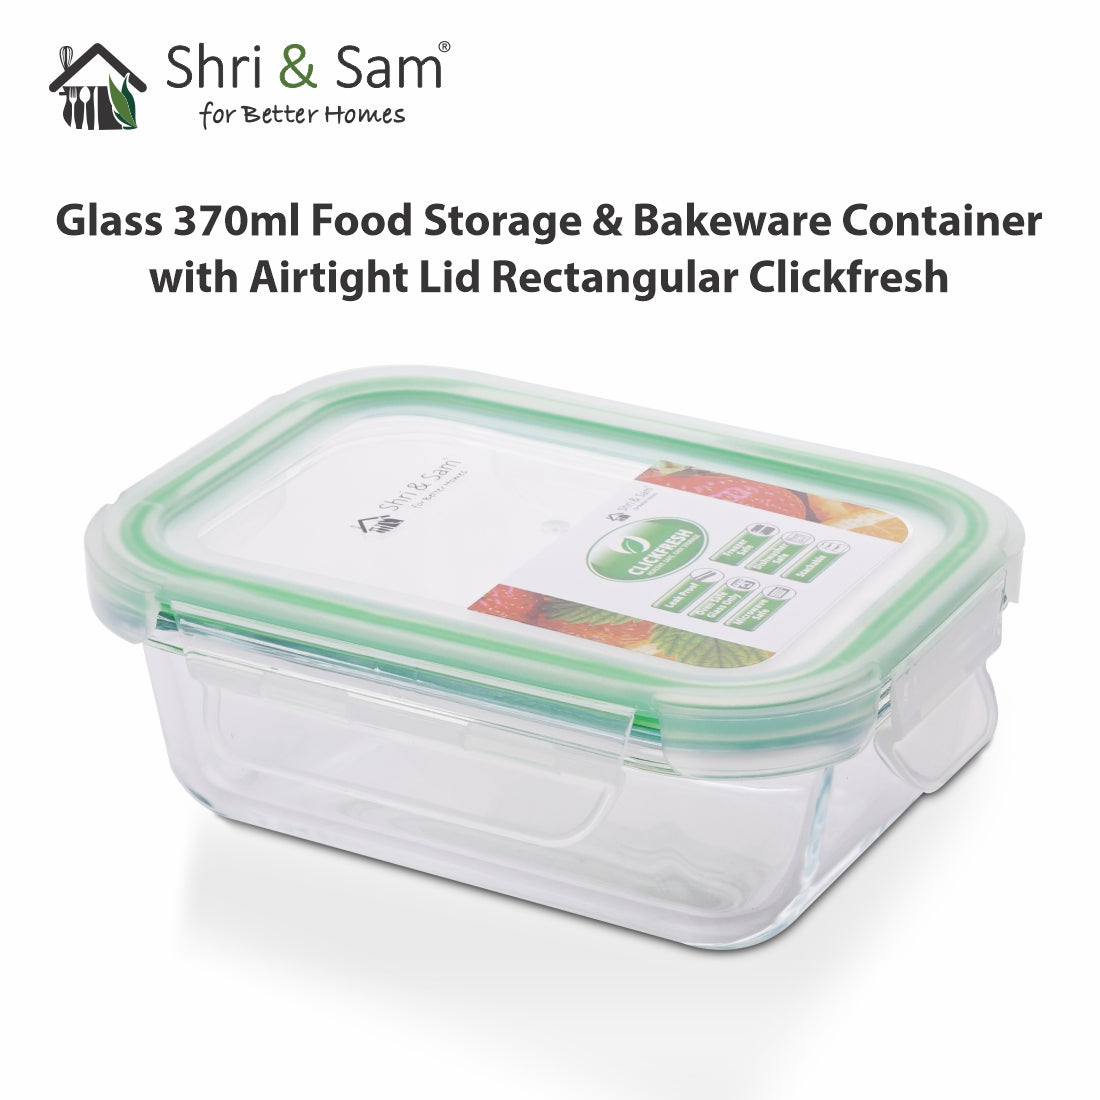 Glass 370ml Food Storage & Bakeware Container with Airtight Lid Rectangular Clickfresh